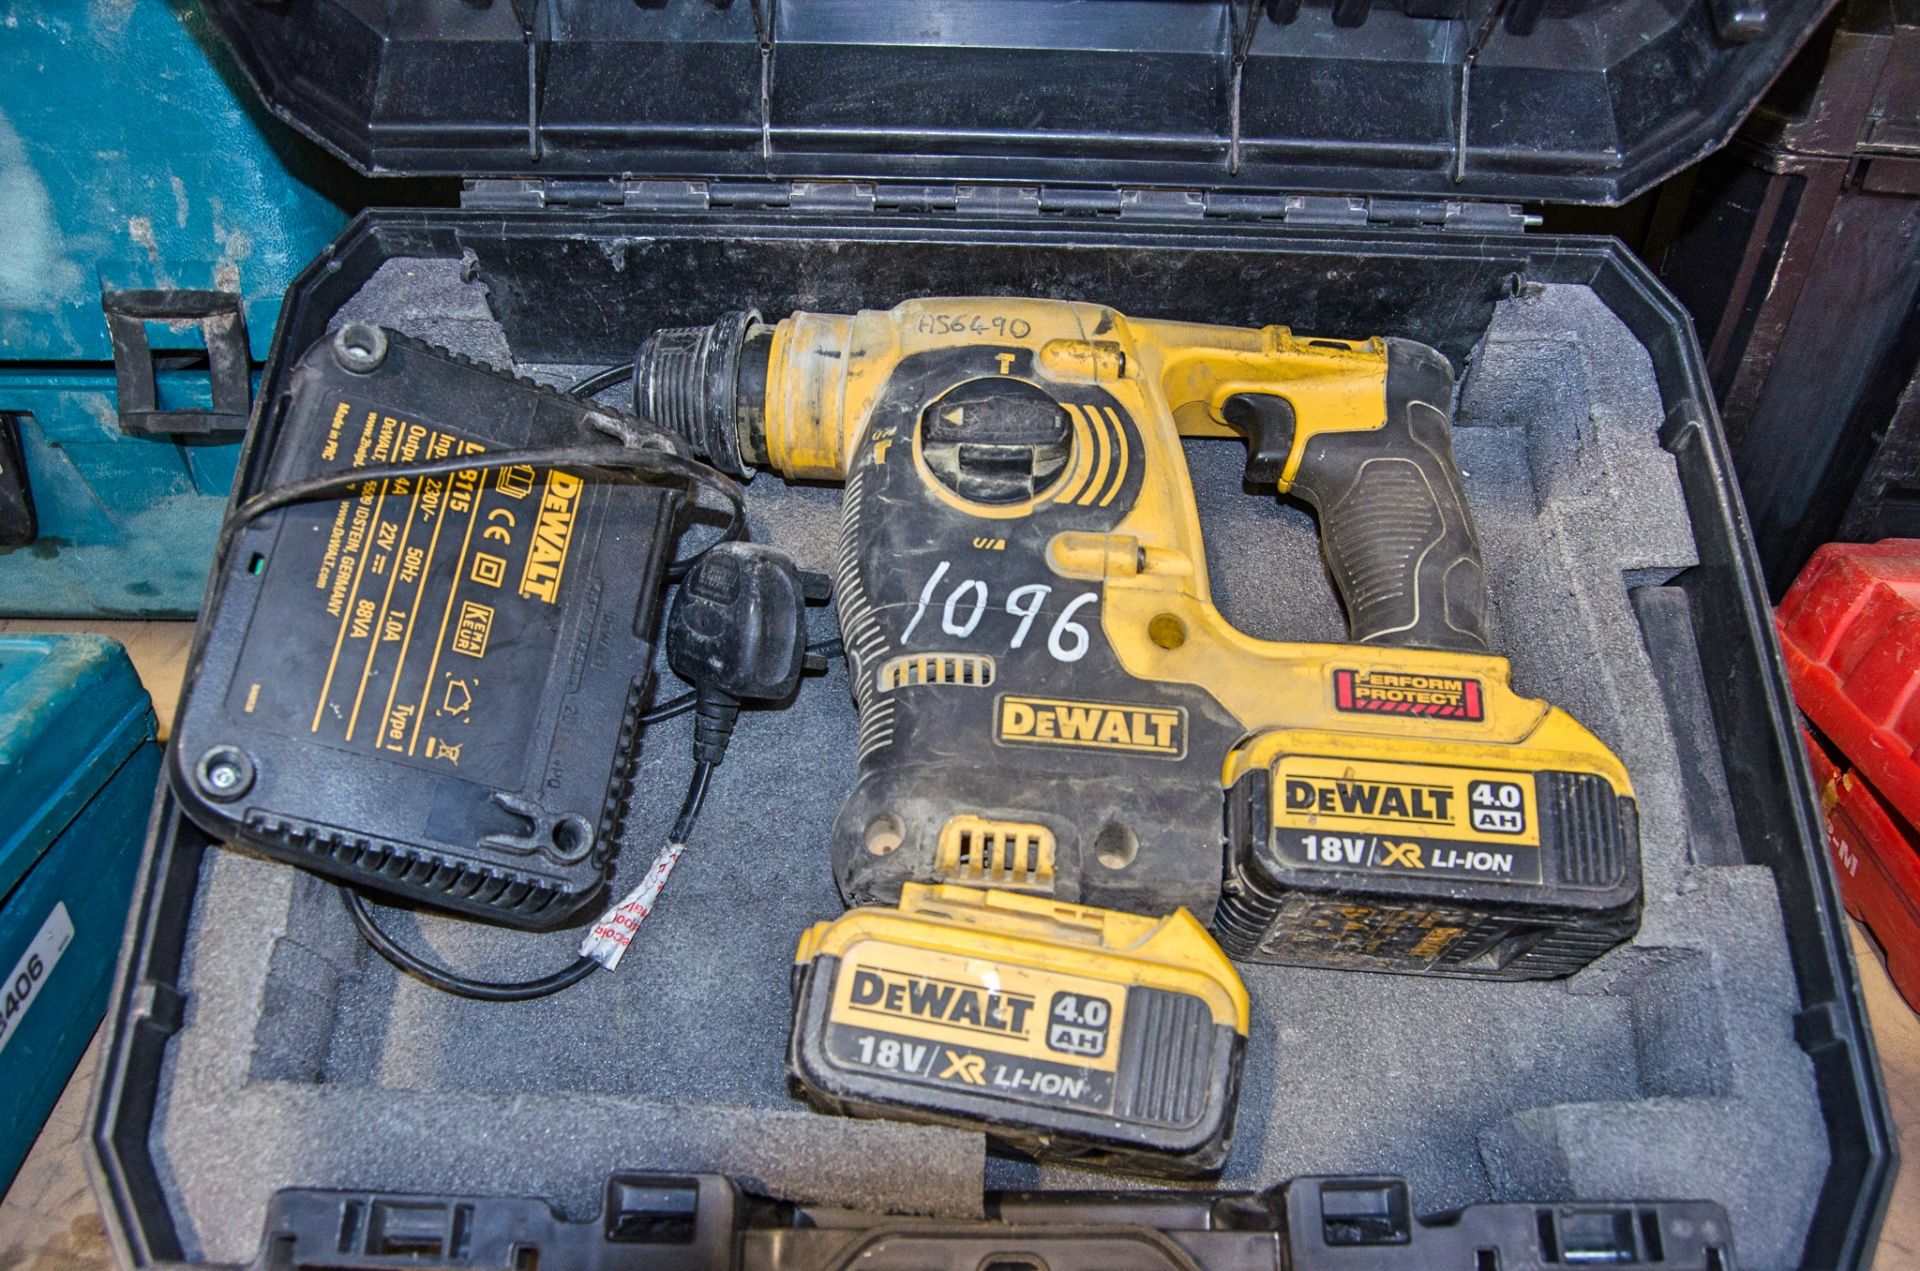 Dewalt DCH253 18v cordless SDS rotary hammer drill c/w 2 - batteries, charger and carry case AS6490